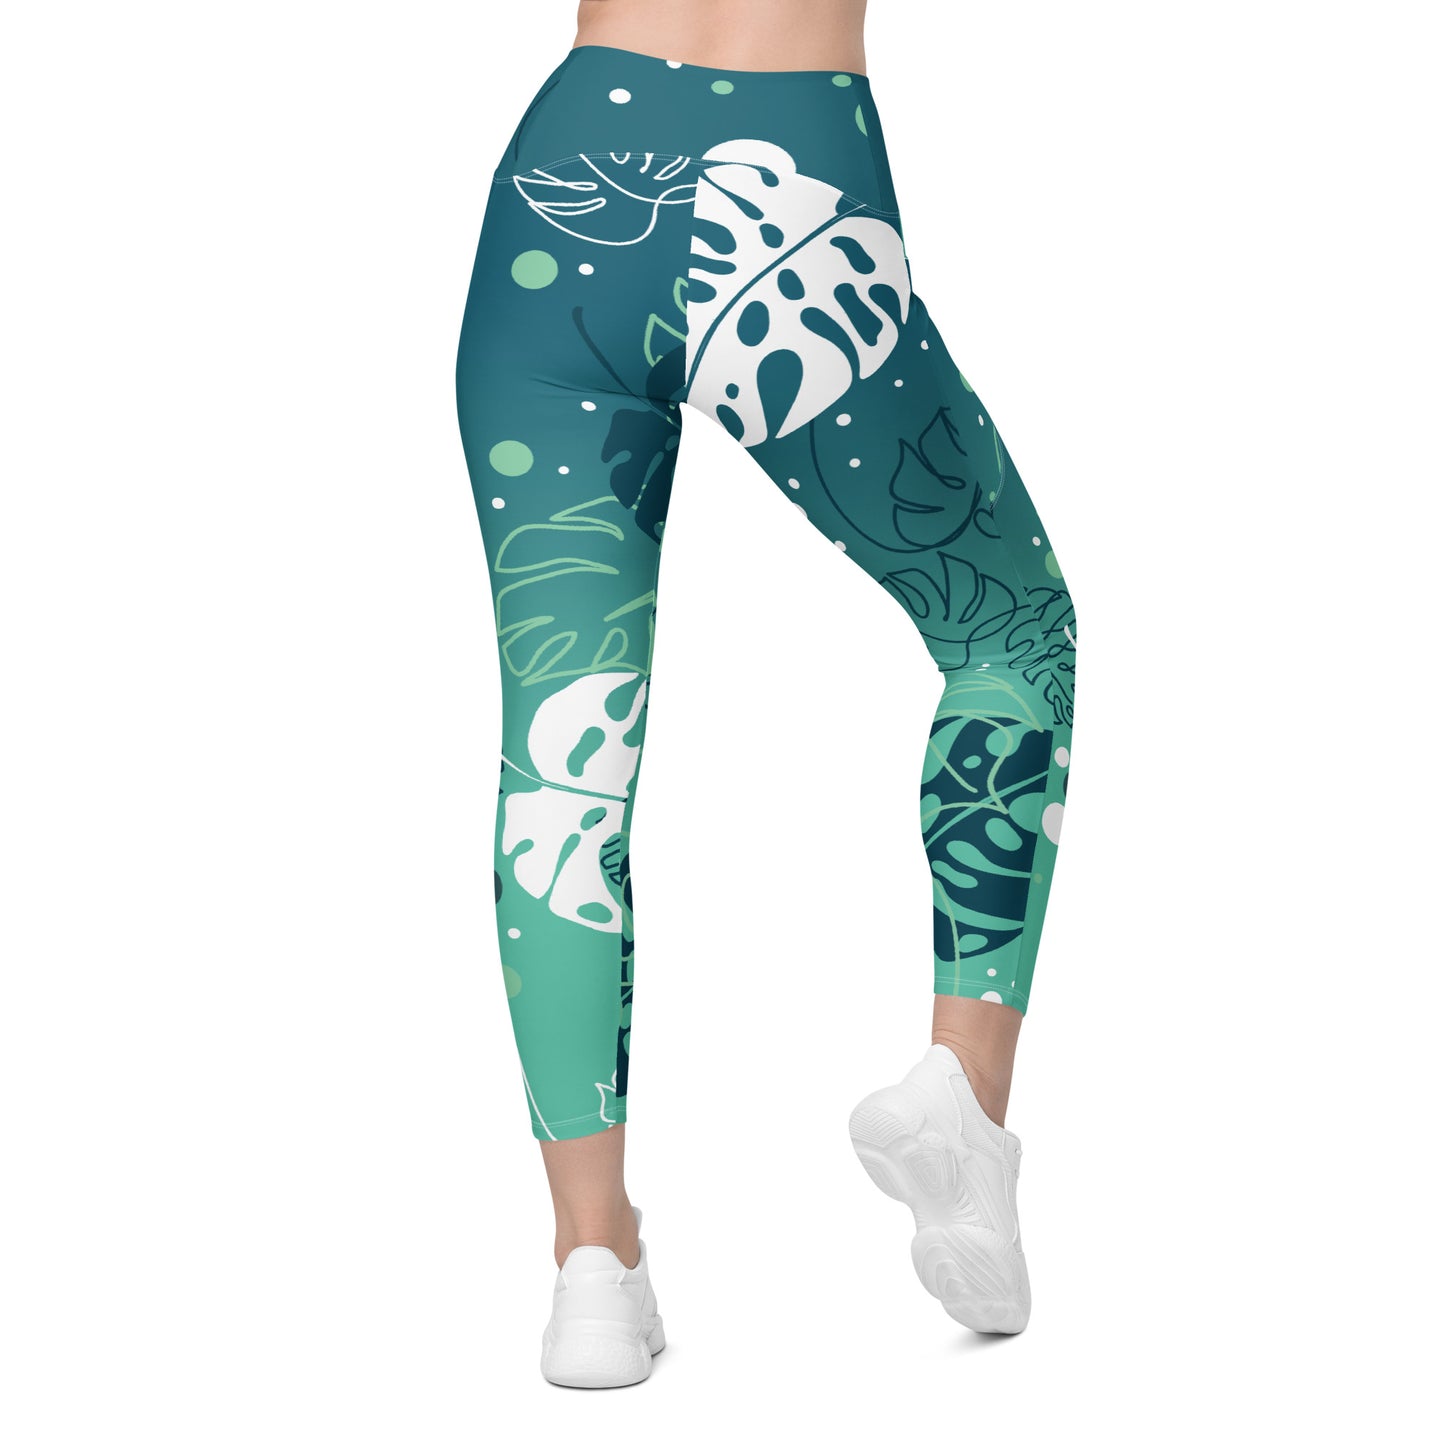 Tropical Leggings with pockets